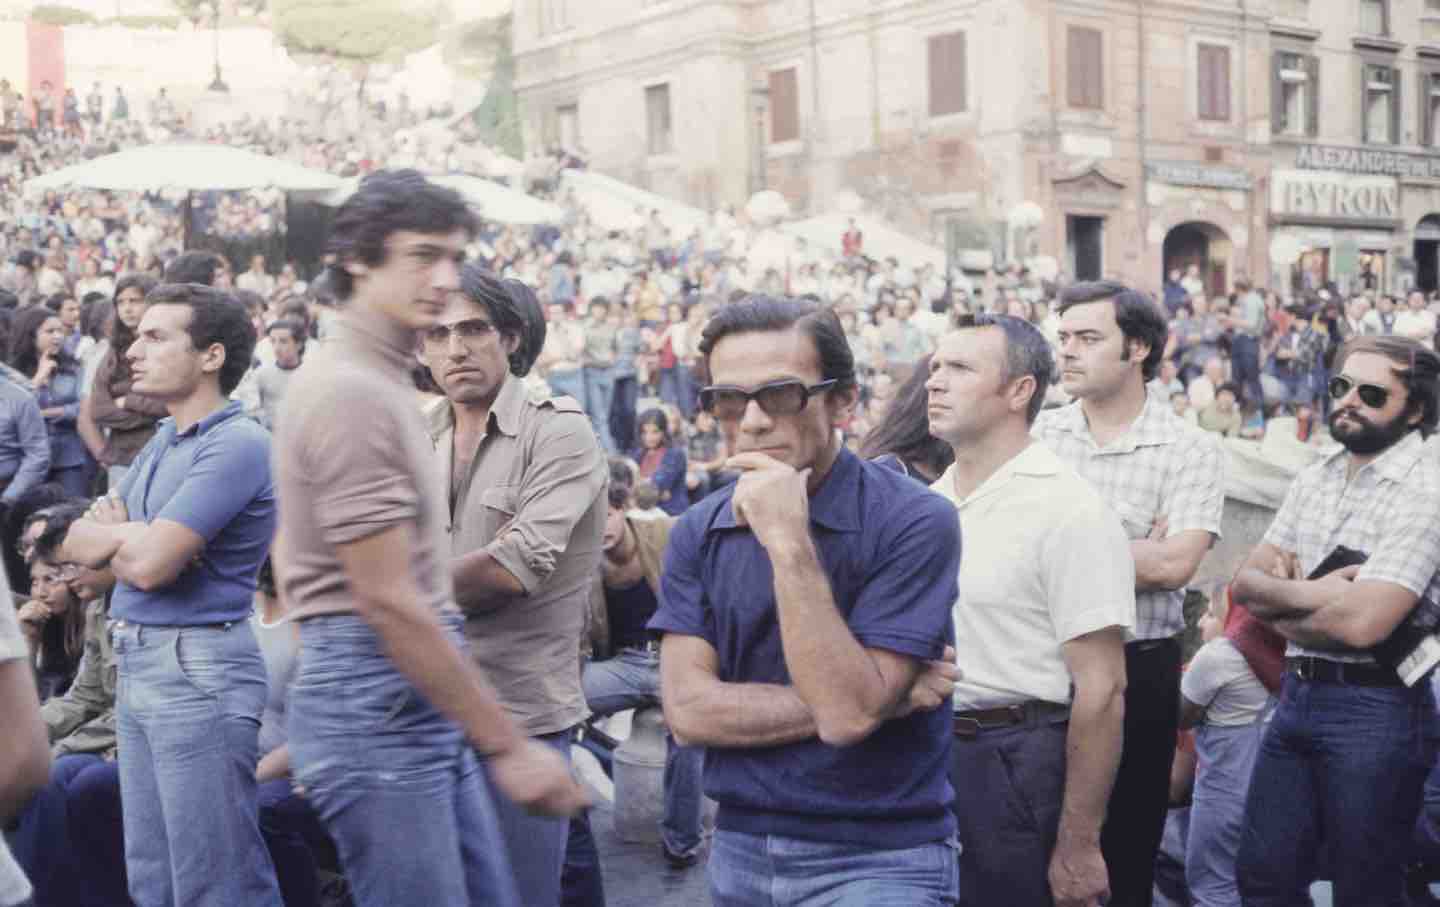 Pier Paolo Pasolini at a demonstration in Rome, 1970.